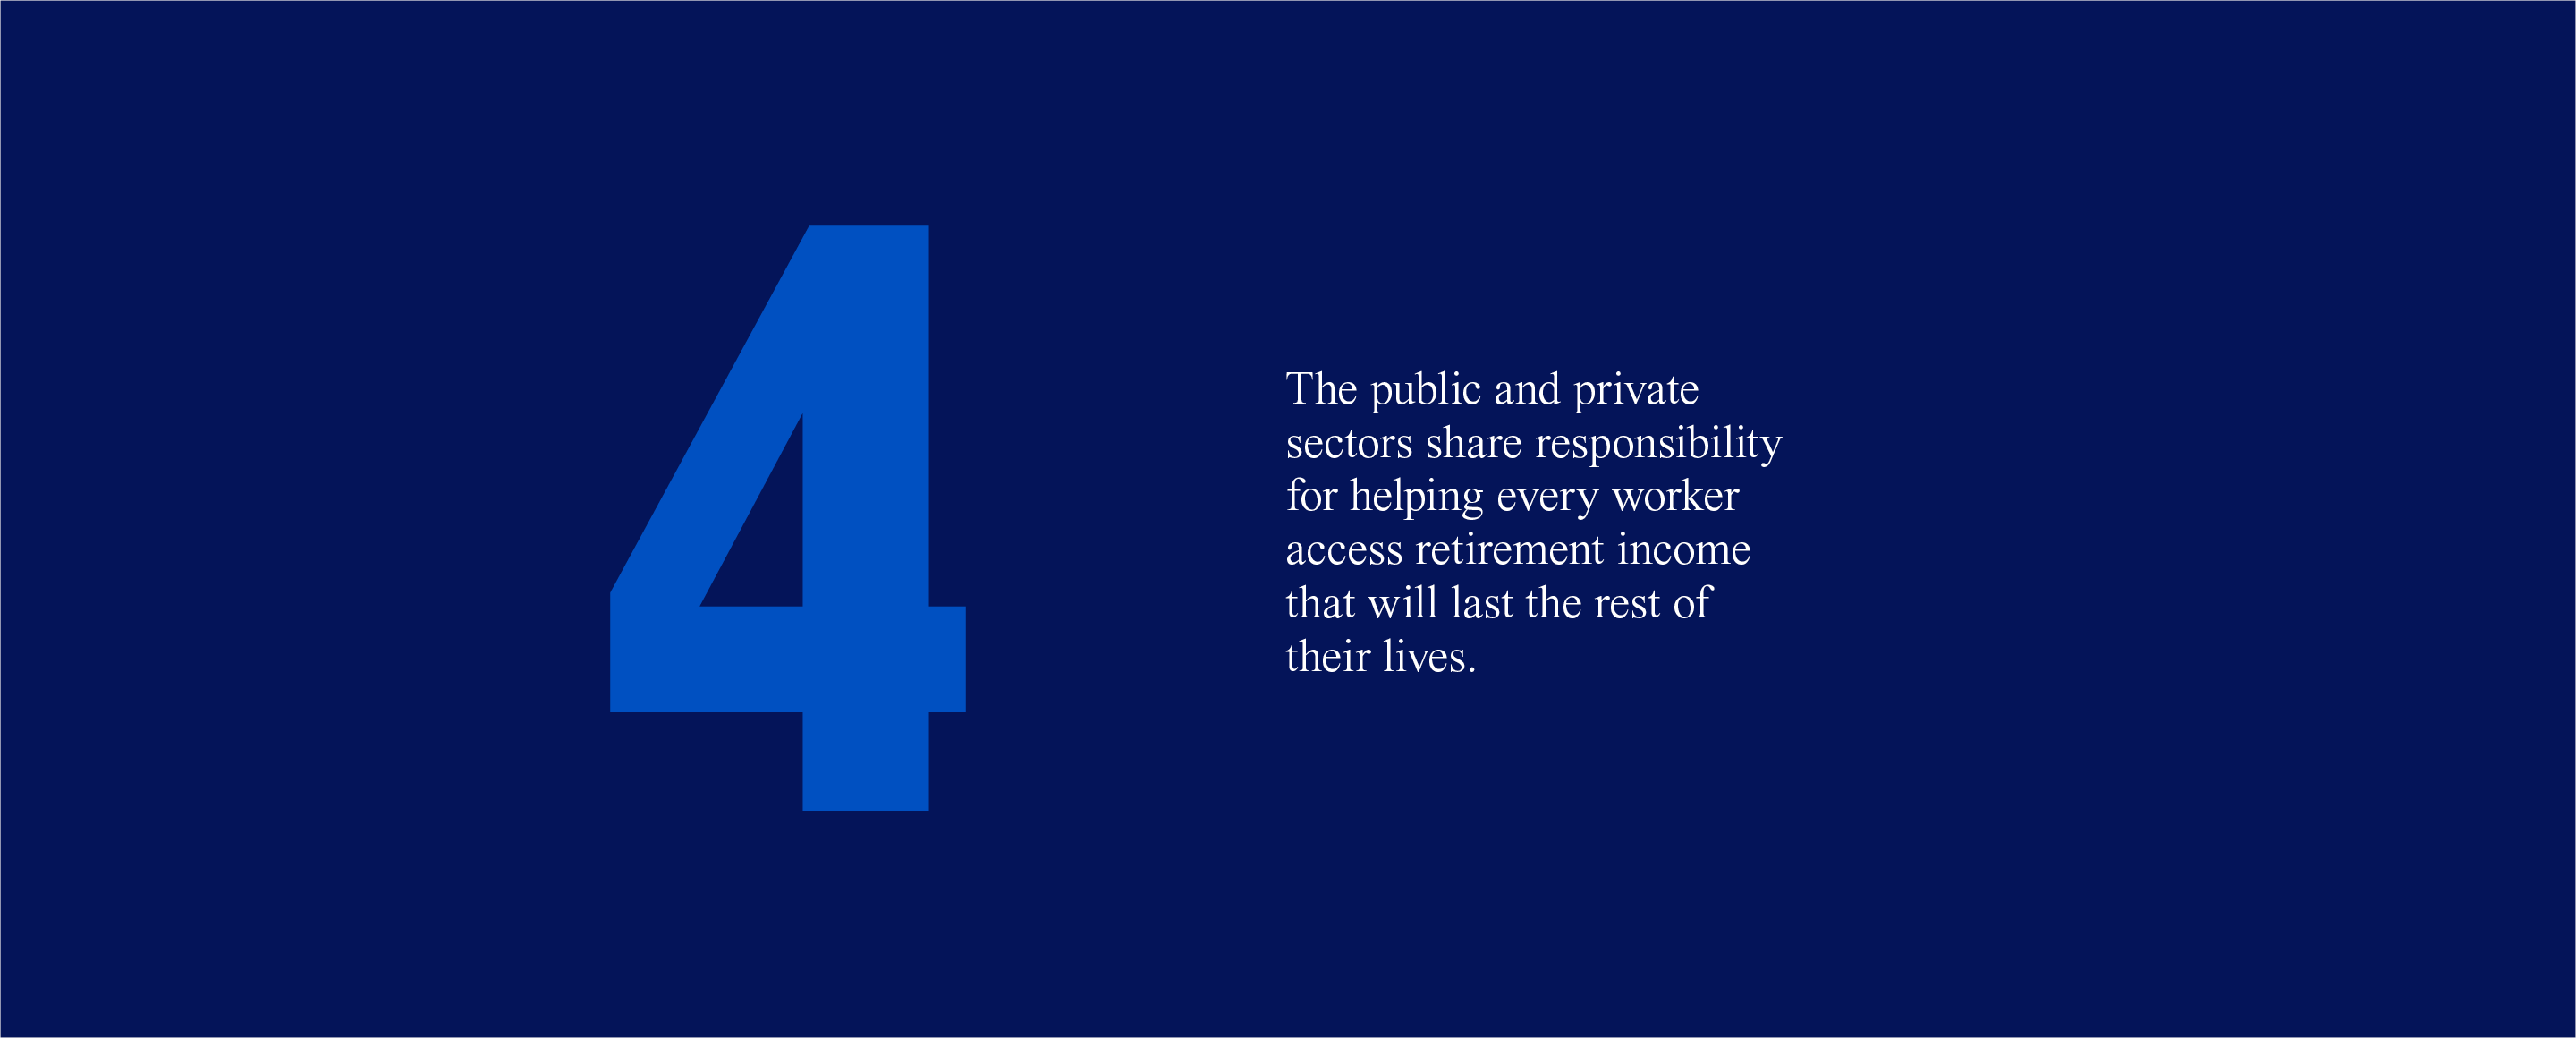 4. The public and private sectors share responsibility for helping every worker access retirement income that will last the rest of their lives.